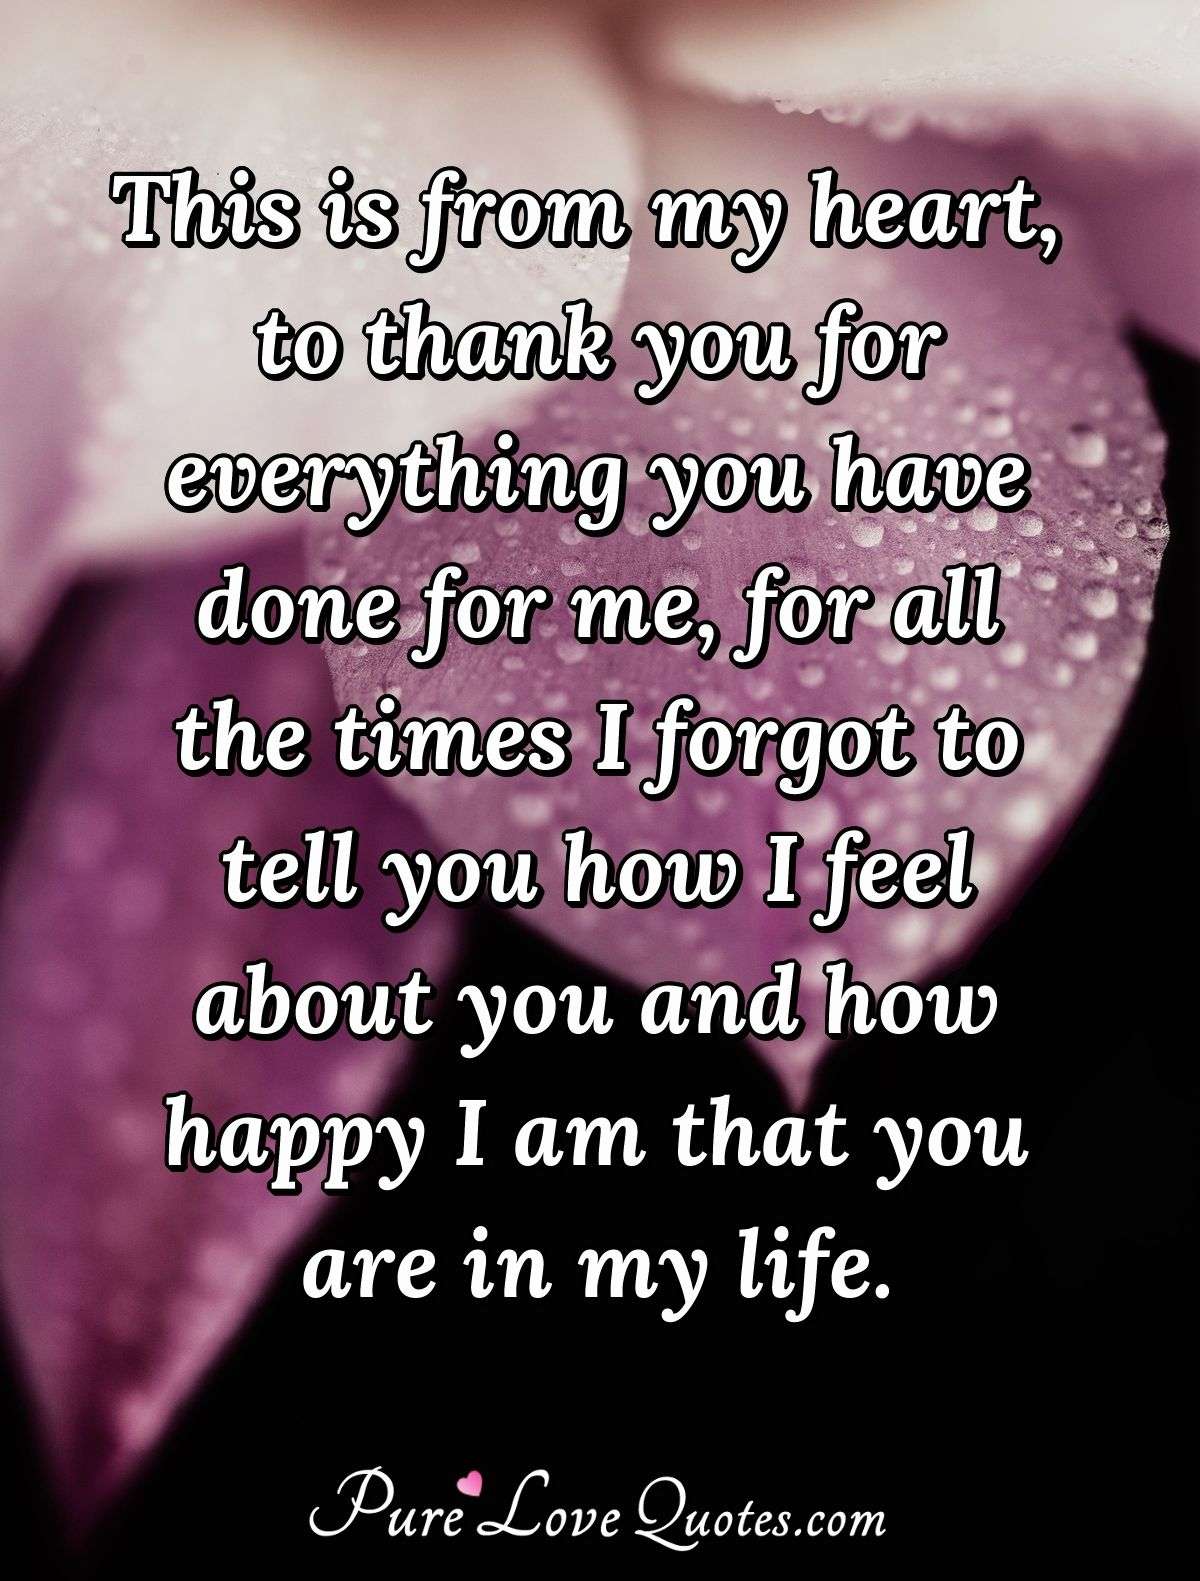 This is from my heart, to thank you for everything you have done for me, for all the times I forgot to tell you how I feel about you and how happy I am that you are in my life. - PureLoveQuotes.com